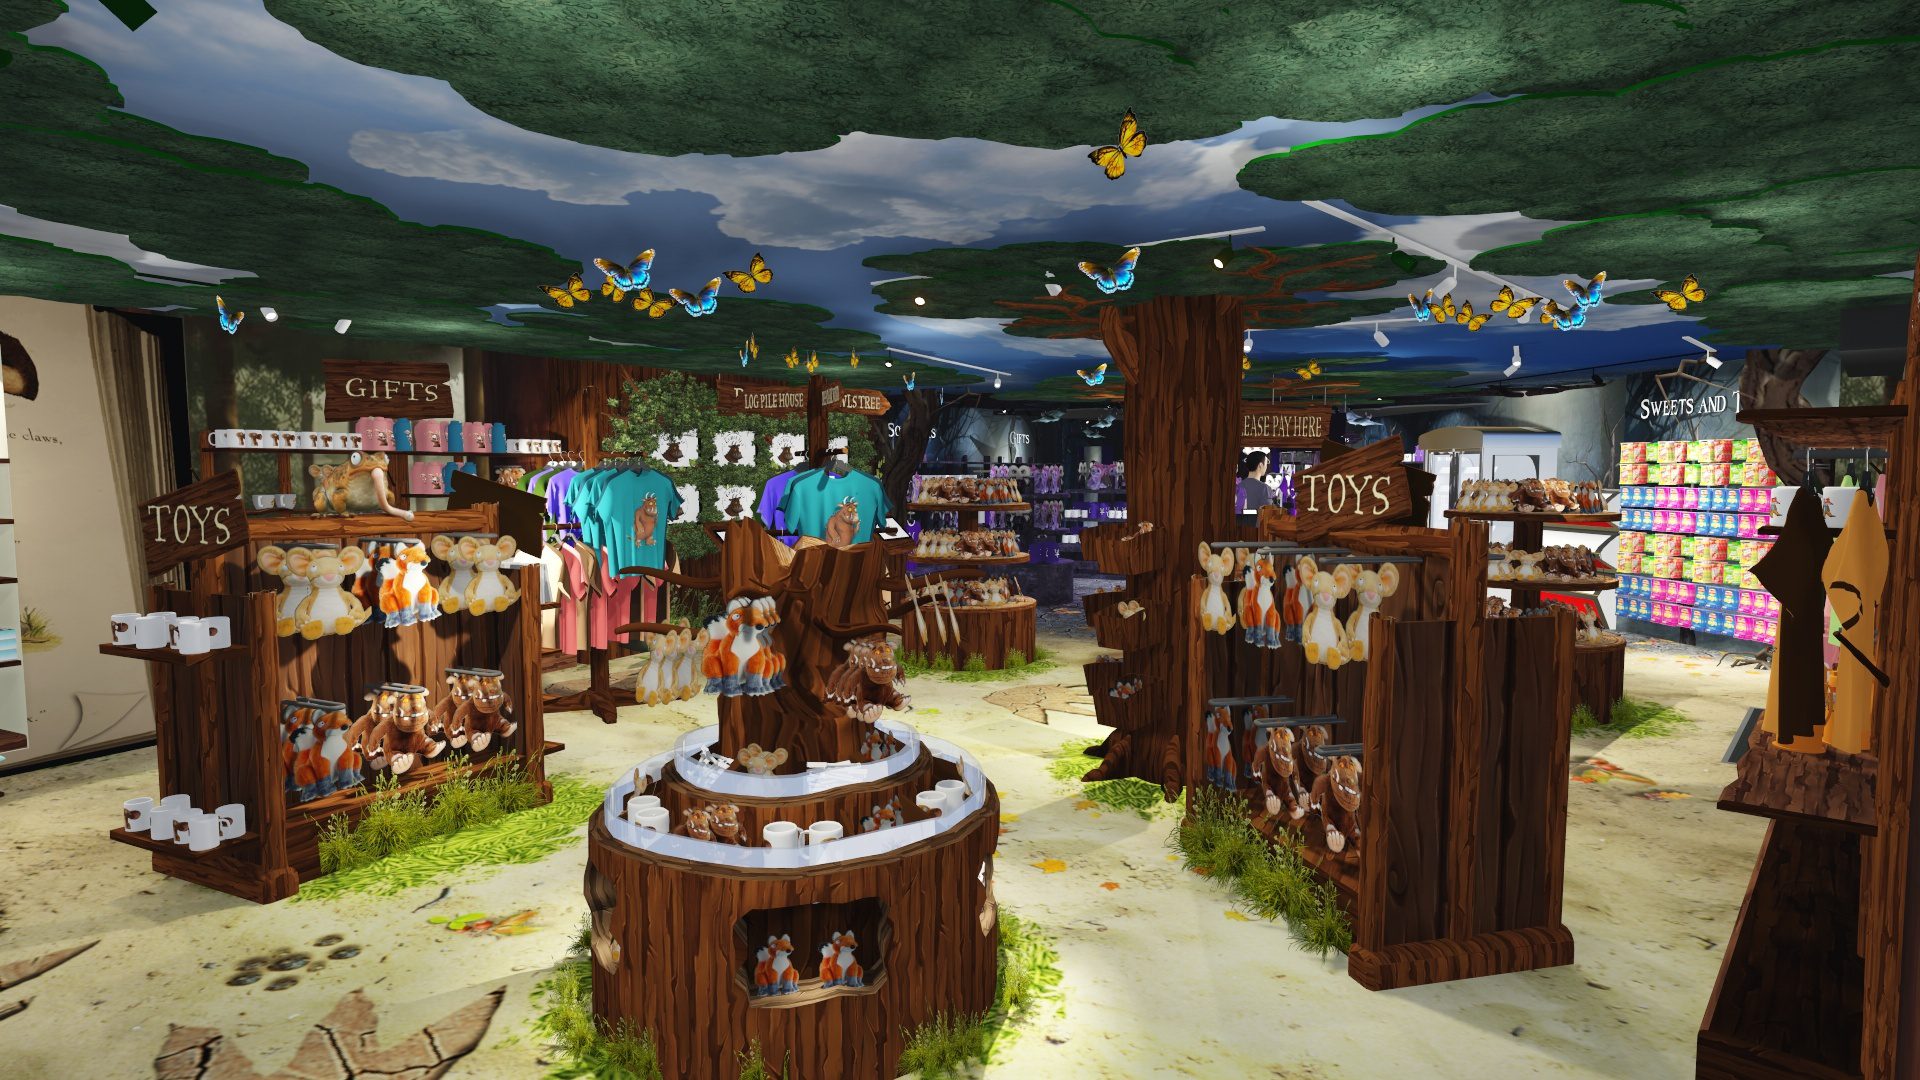 A concept image of a Gruffalo themed gift shop with soft toys and t-shirts on display